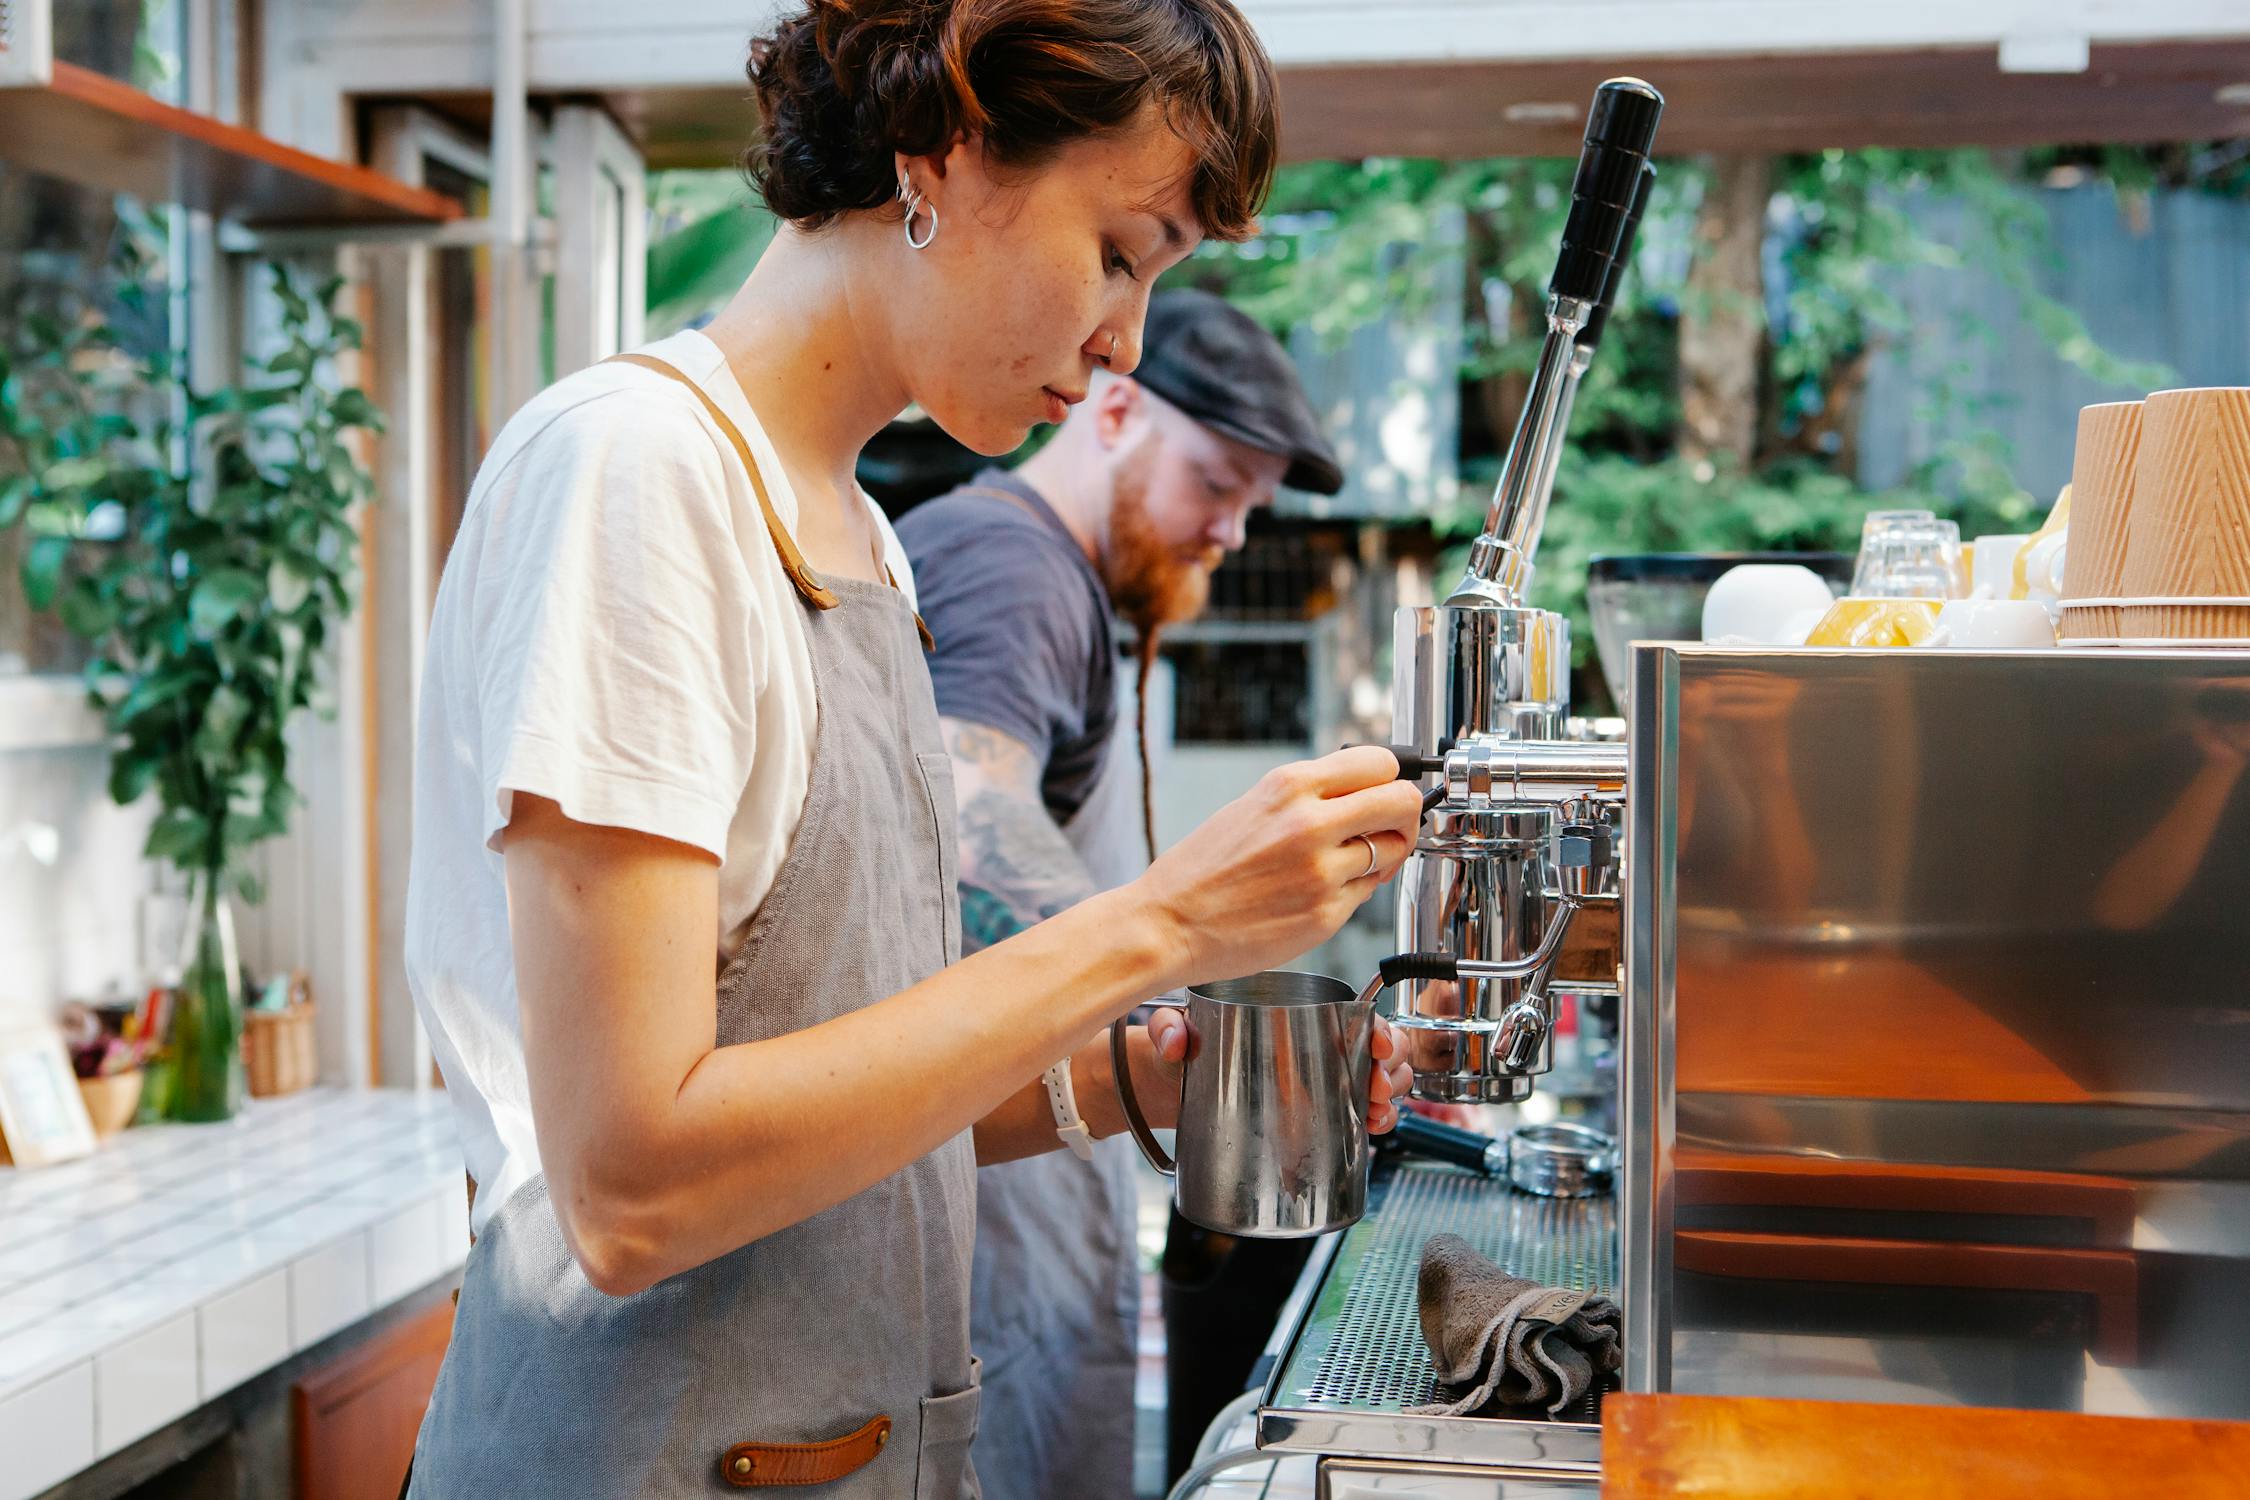 A young girl making coffee at a cafe 